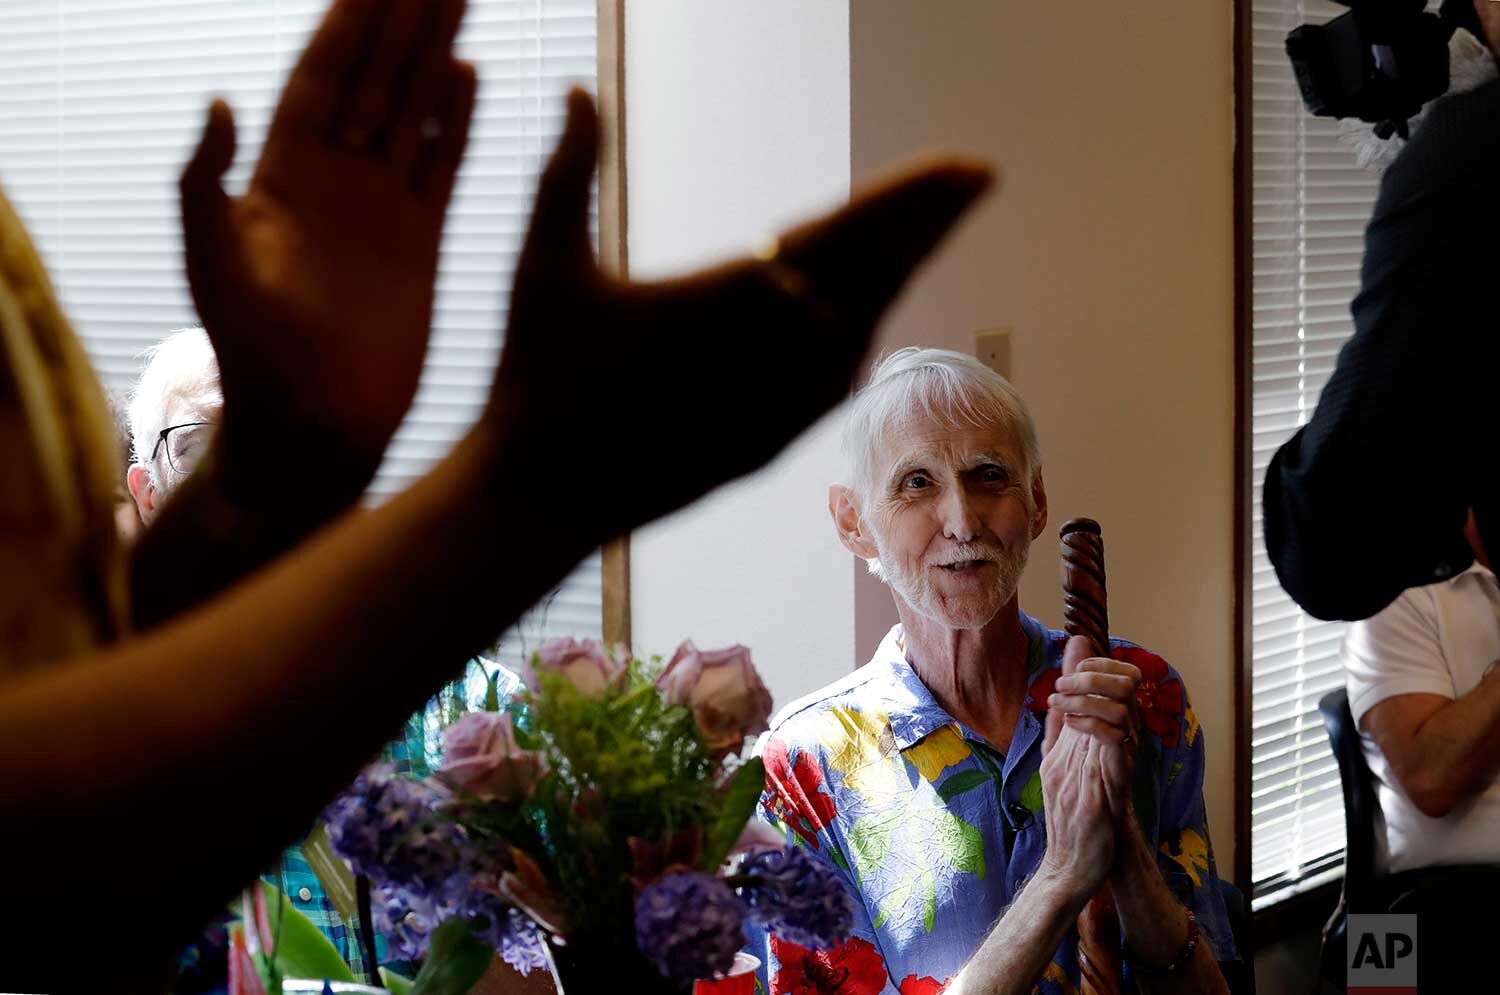  In this May 10, 2019, photo, Robert Fuller smiles as he listens to music at a party in his honor, hours before he would die, in Seattle. (AP Photo/Elaine Thompson) 